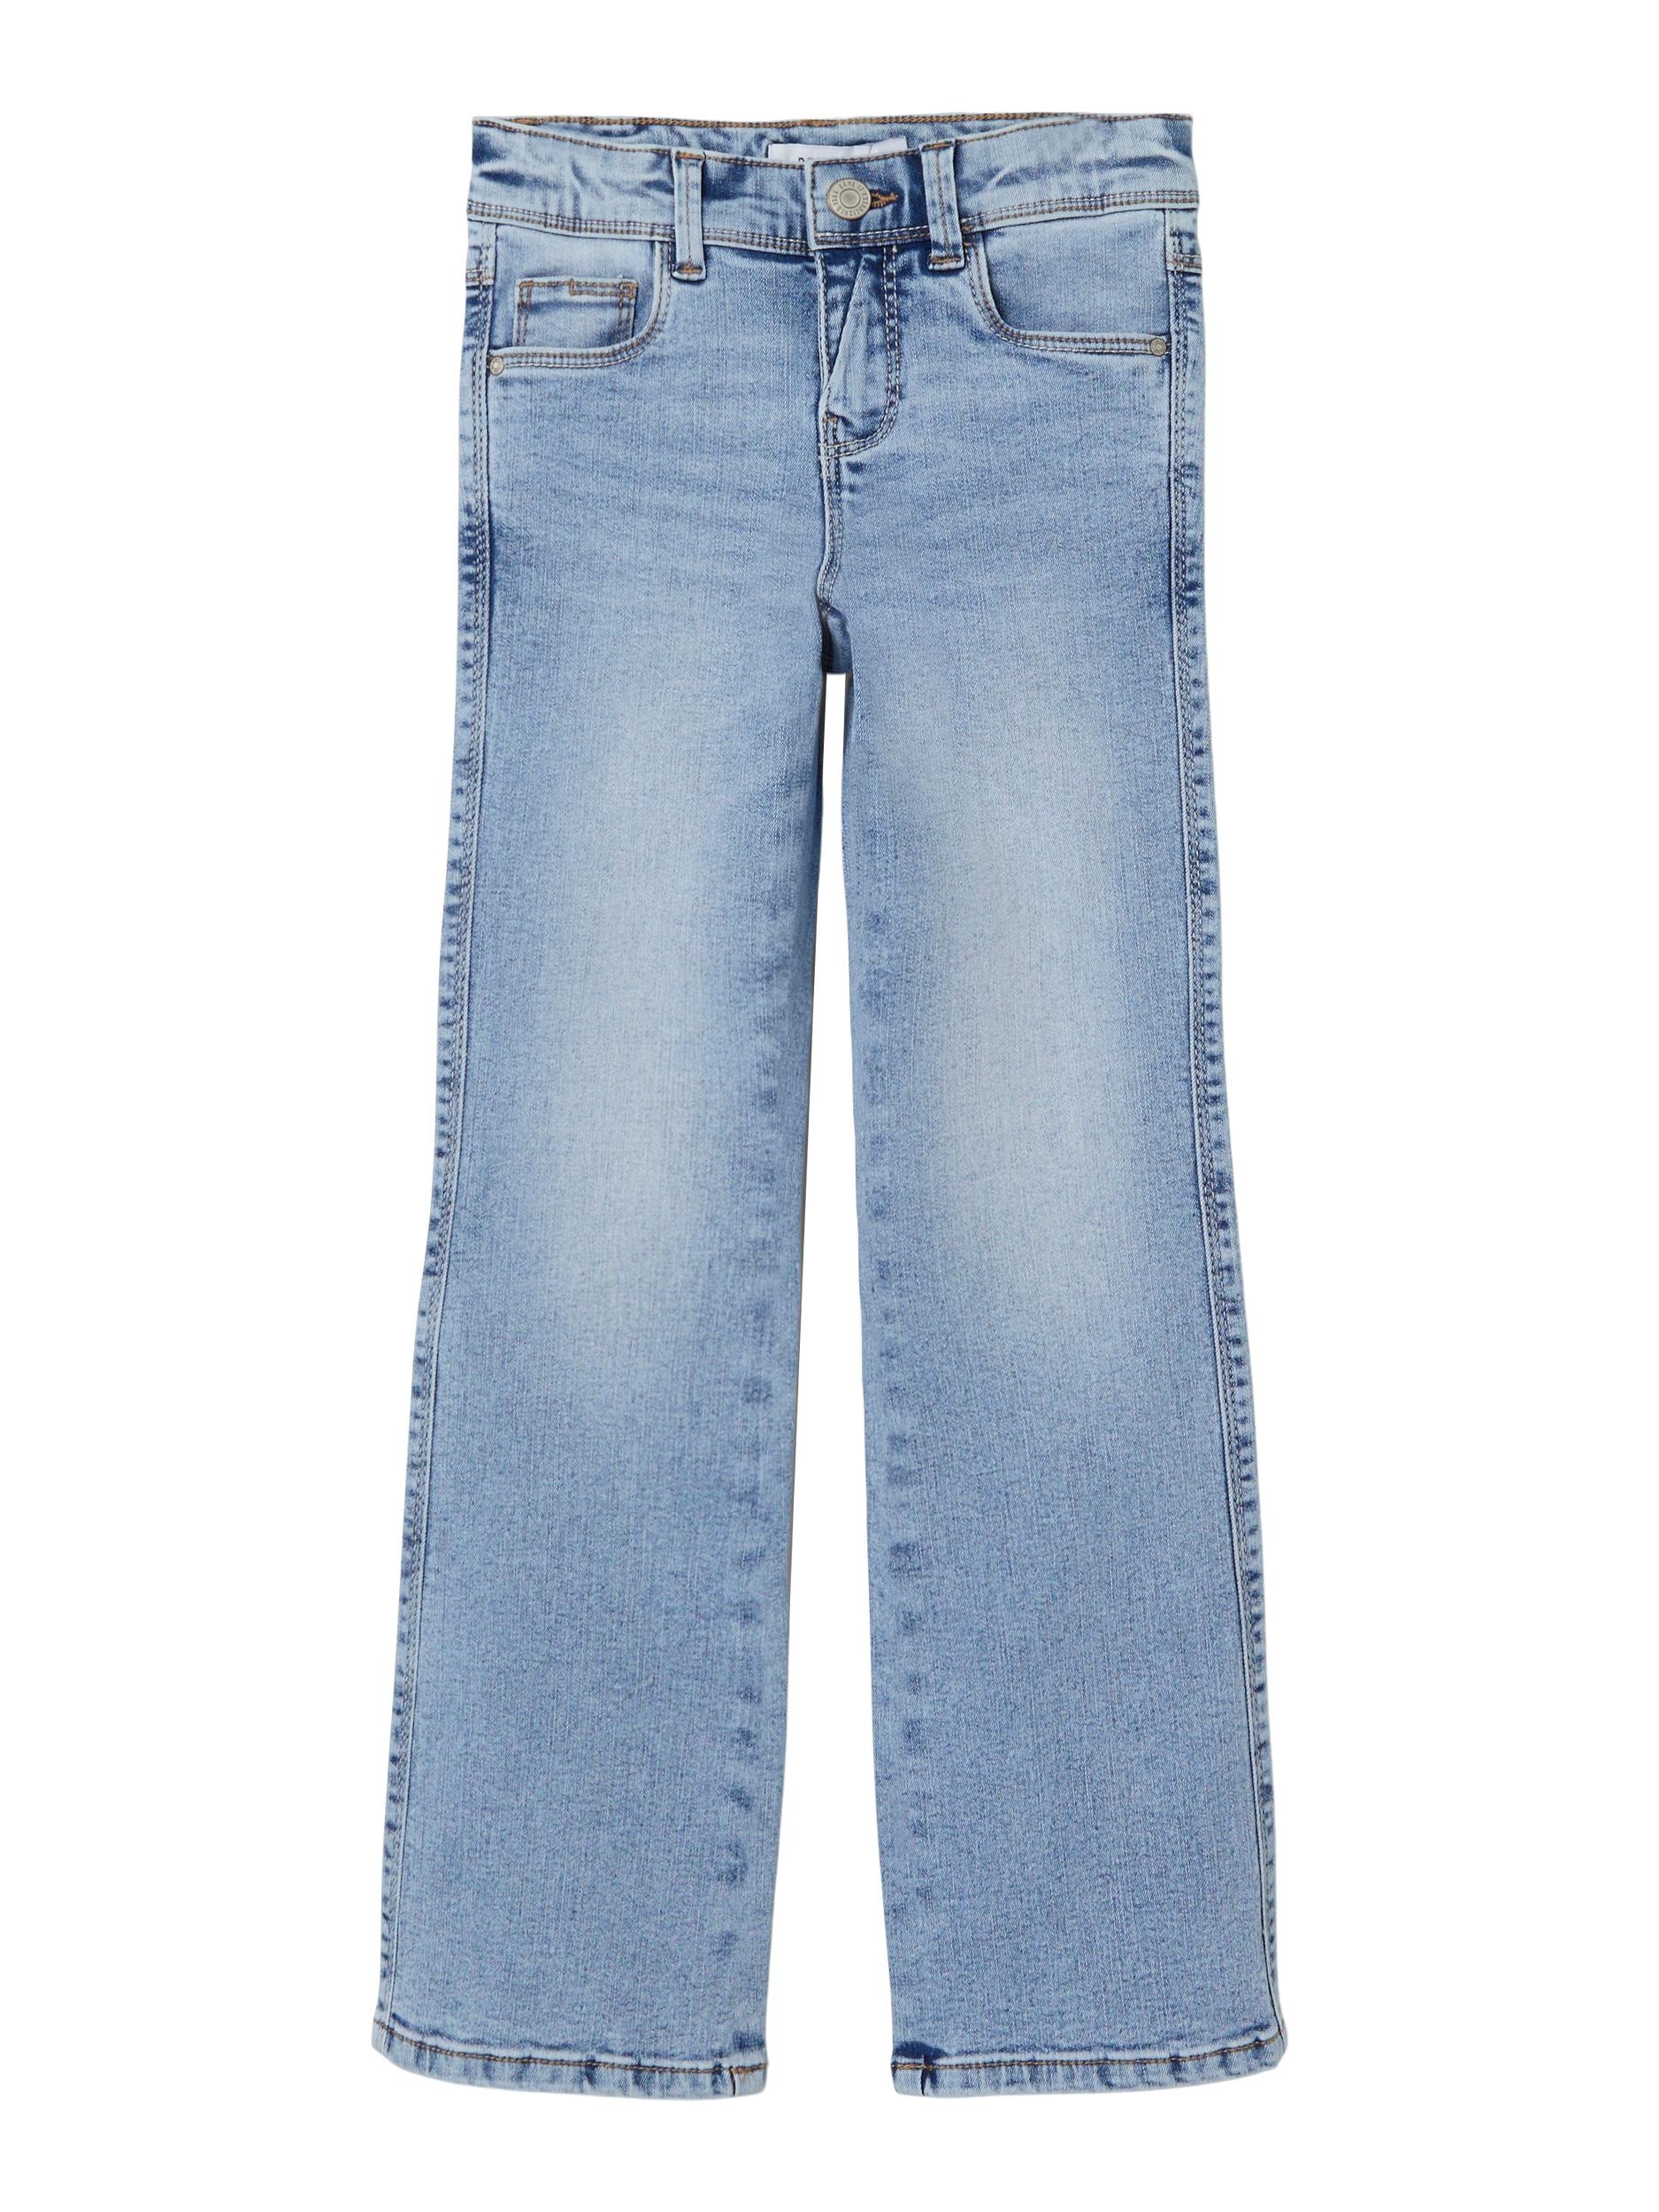 »NKFPOLLY It 1142-AU mit SKINNY Stretch JEANS NOOS«, Bootcut-Jeans bestellen BOOT Name